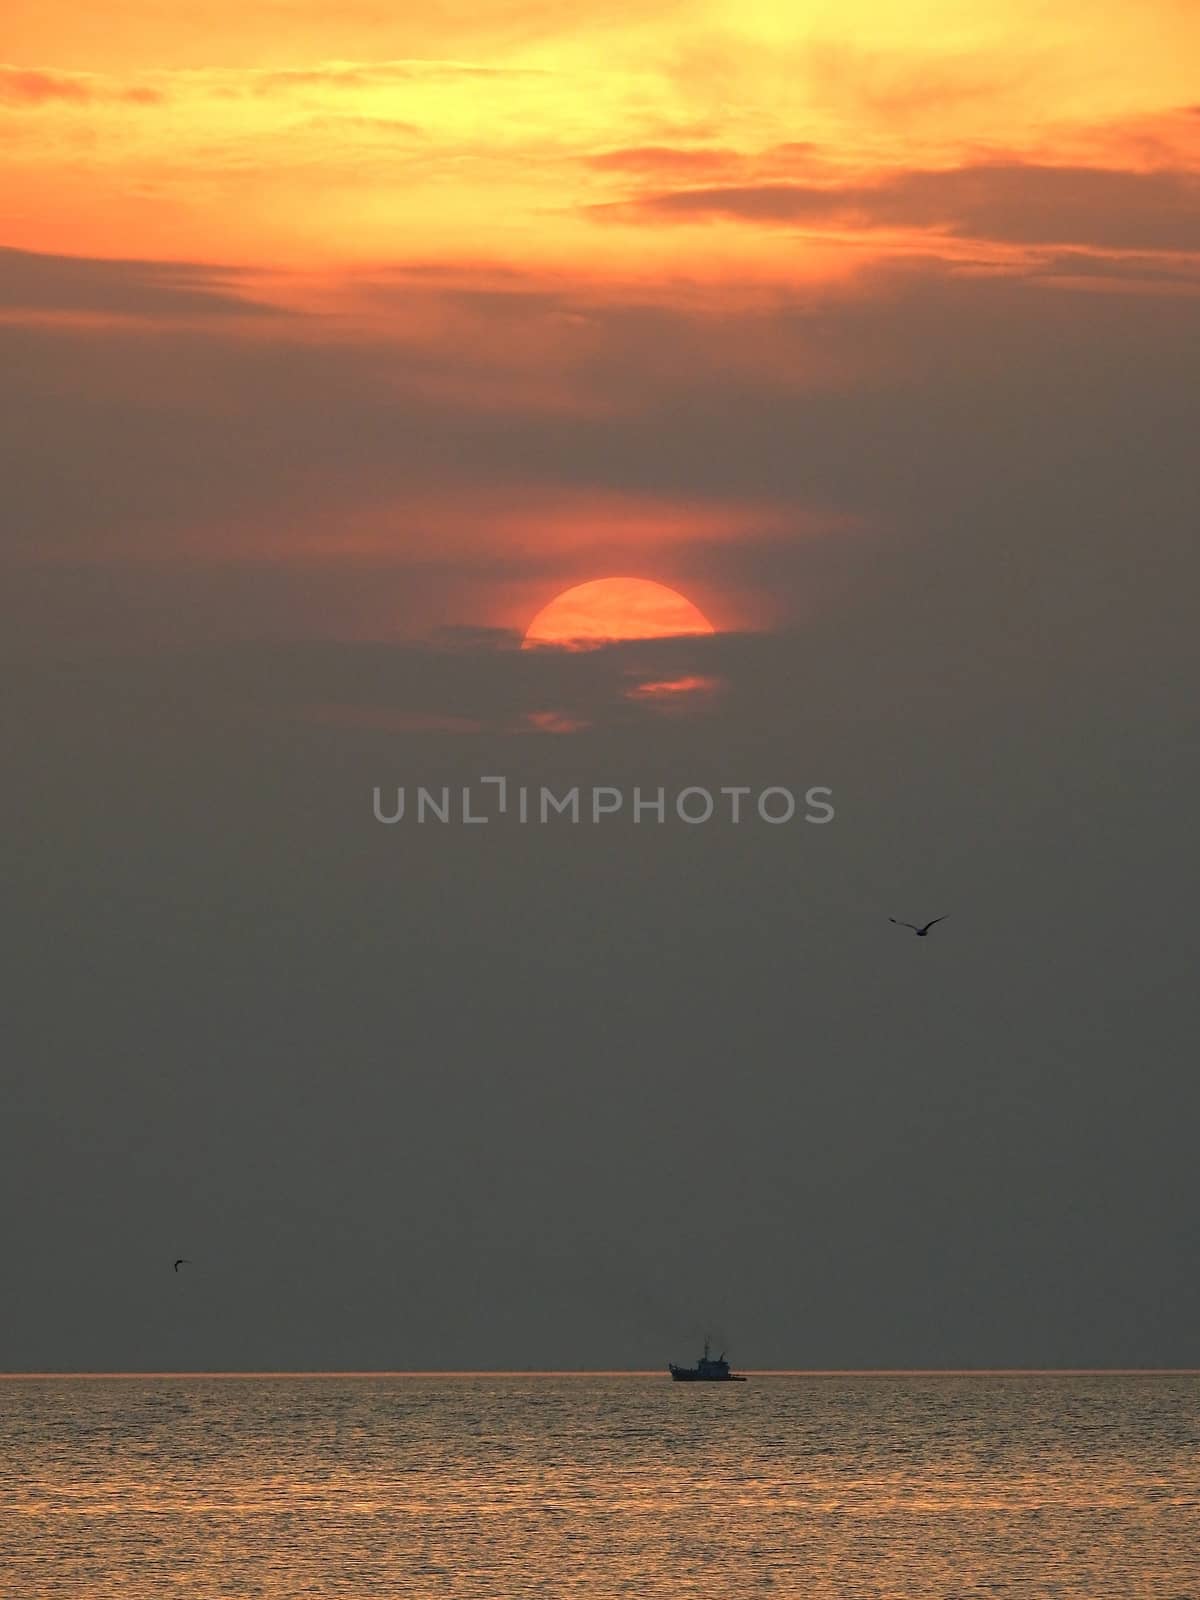 Sunset and  lonely boat at thailand sea.